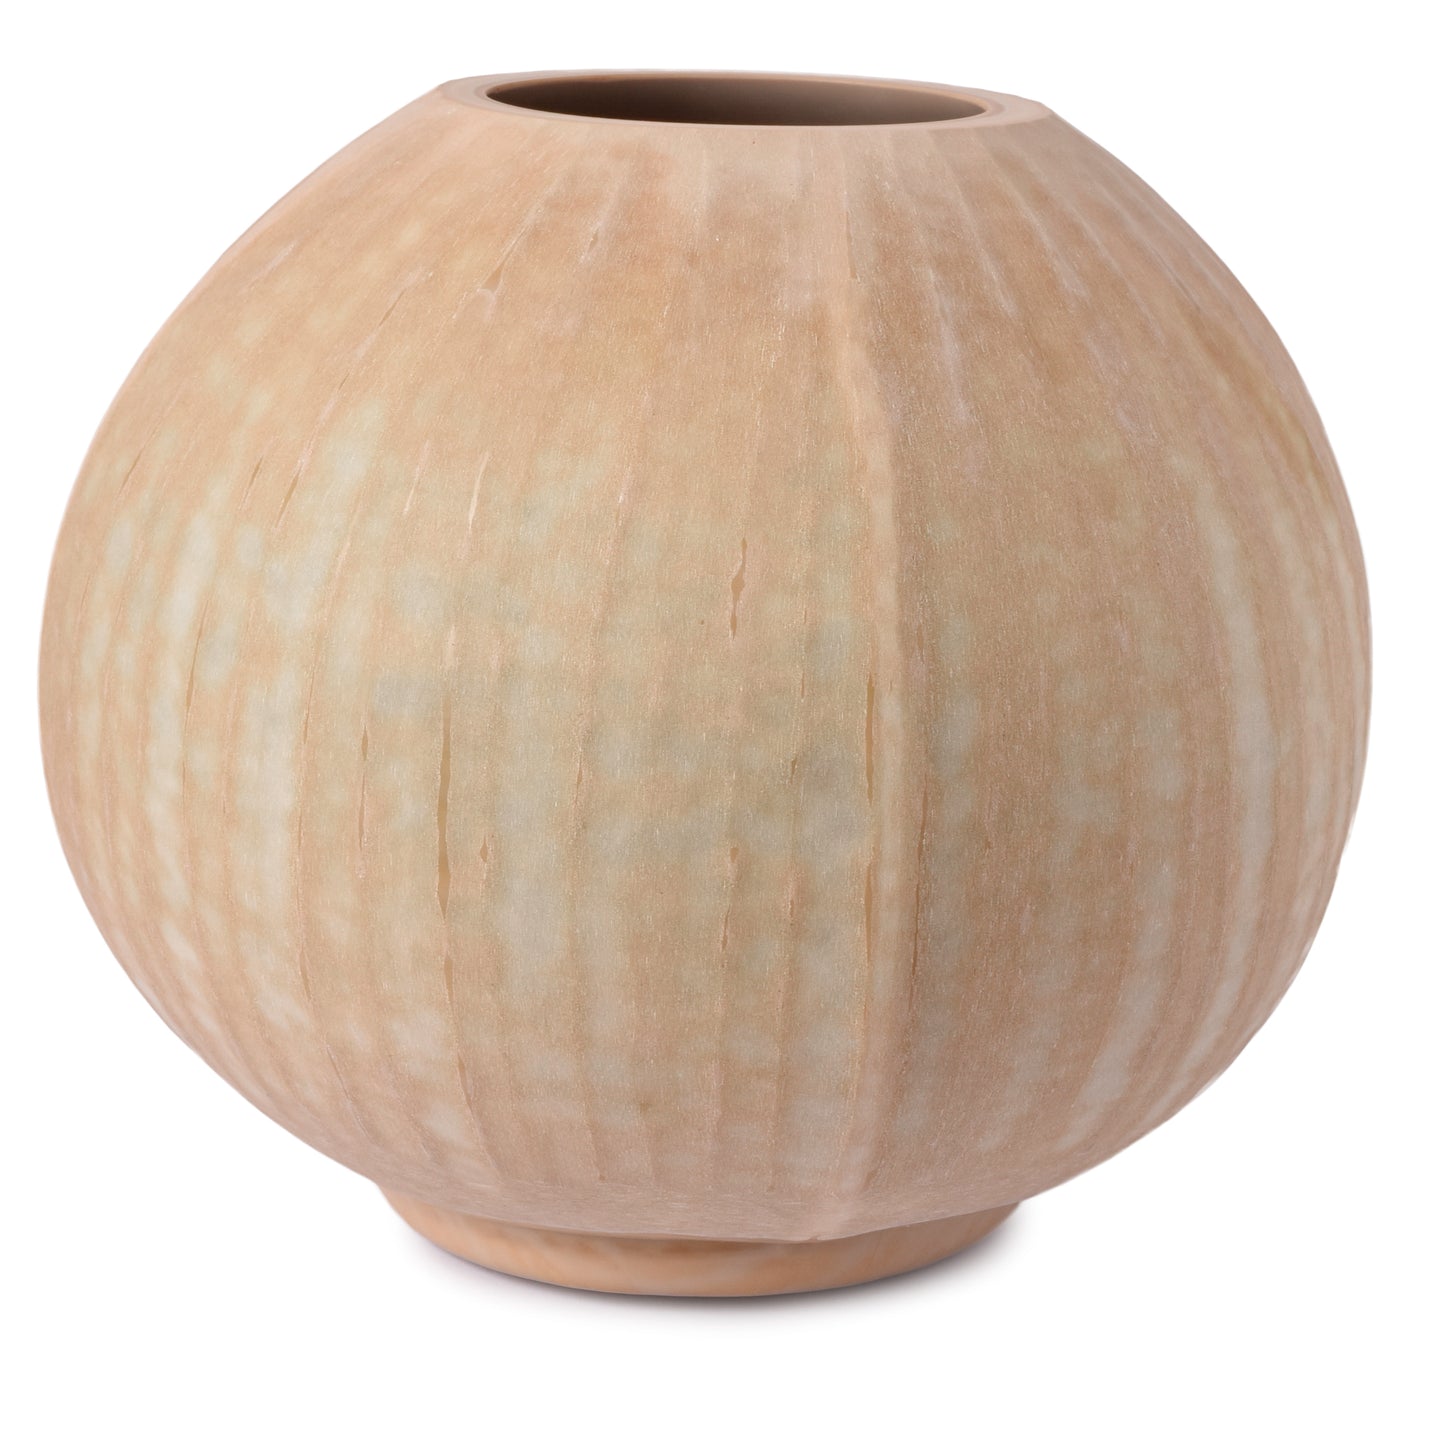 Smooth Spherical Turned Wood Hollow Form Wood Vase with Diamond by Homenearth